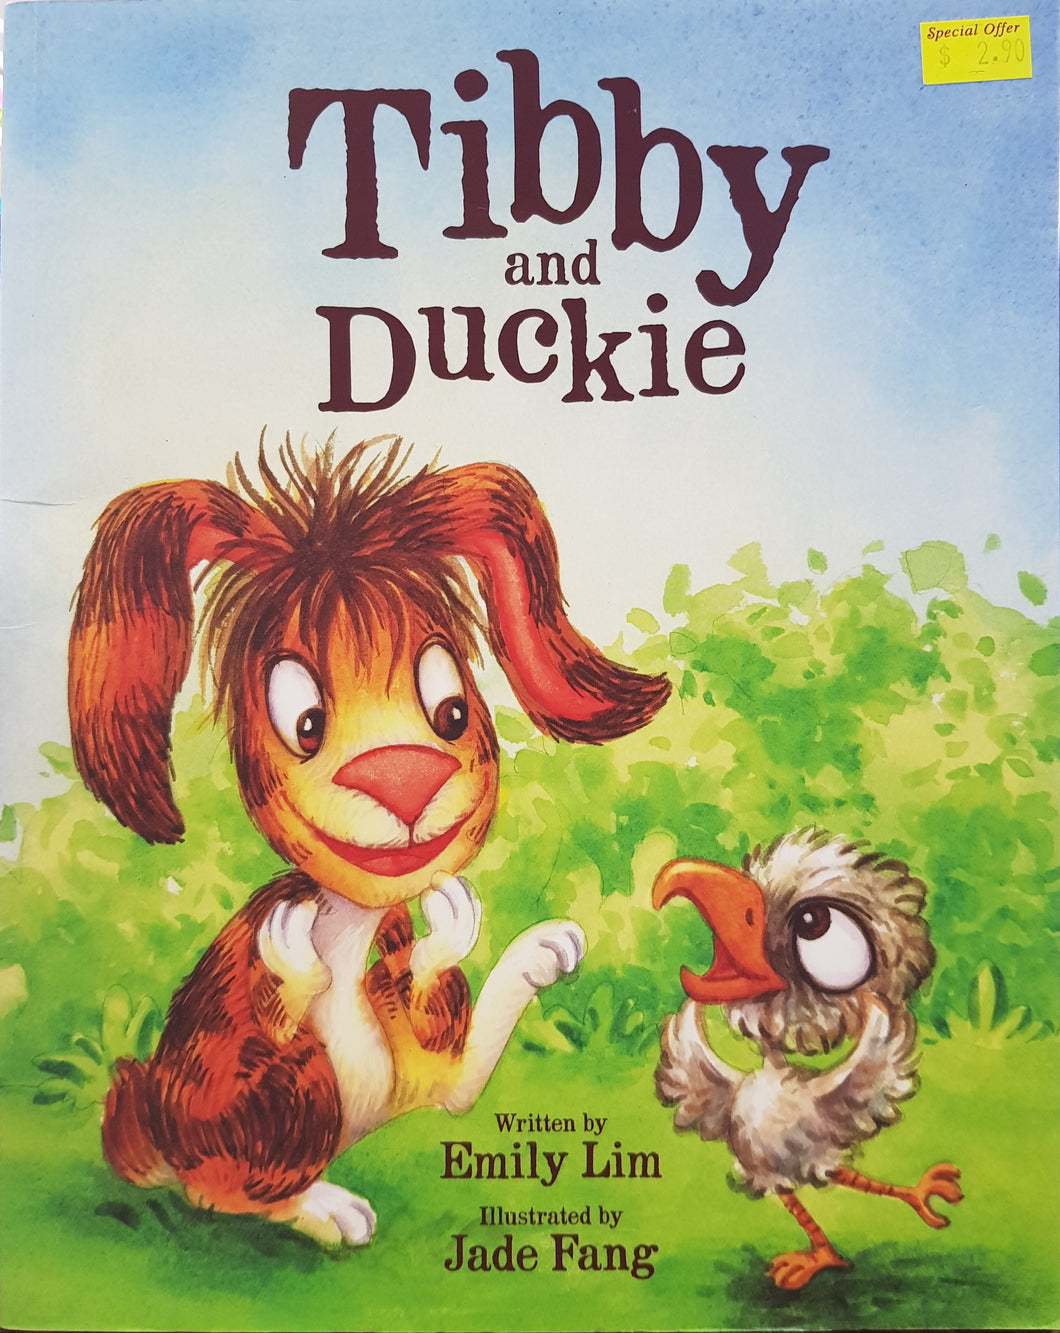 Tibby and Duckie - Emily Lim & Jade Fang